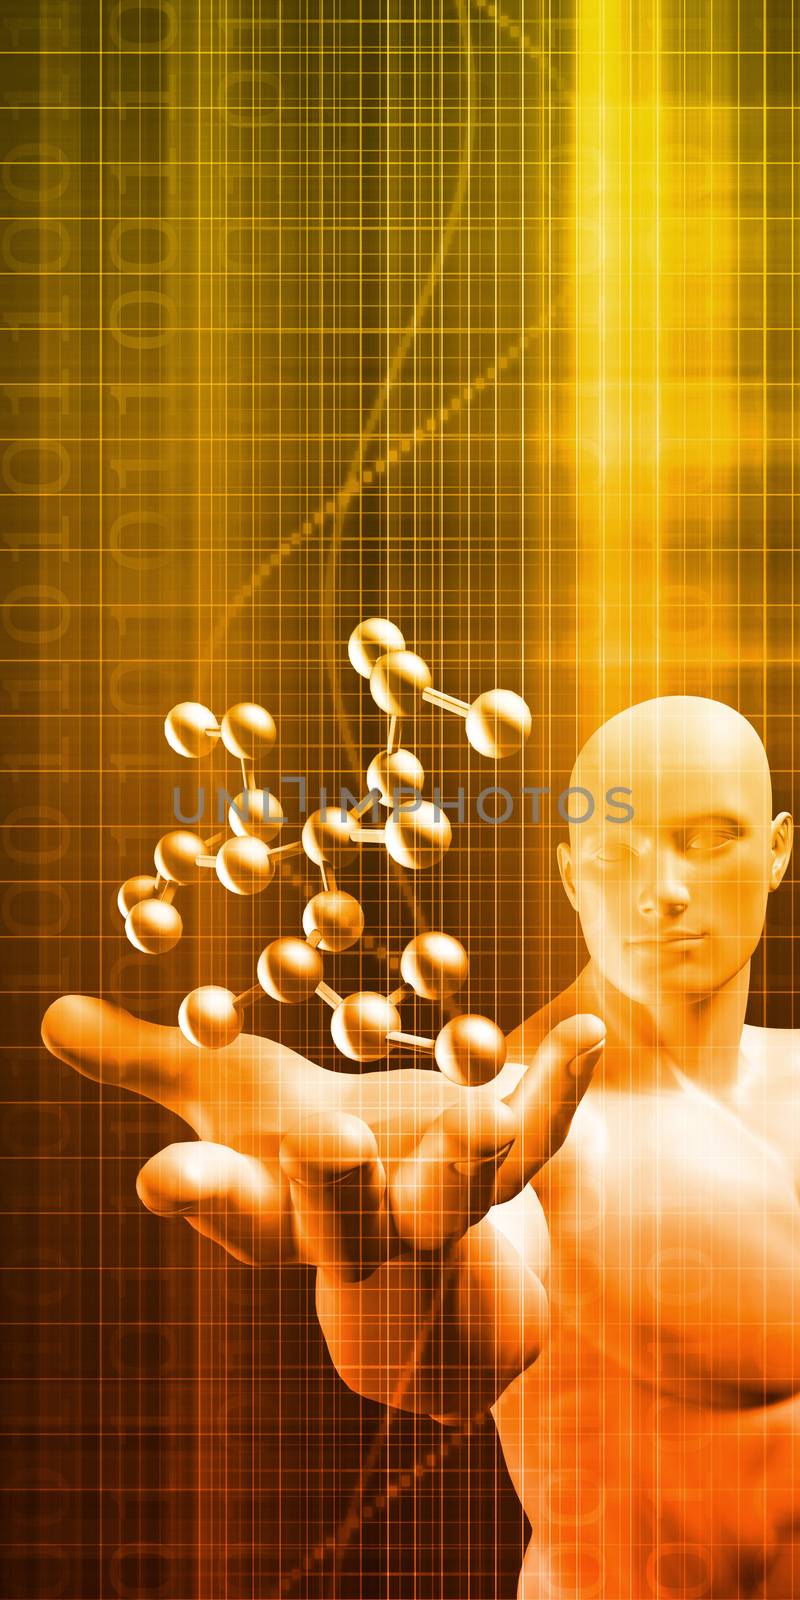 Medical Abstract Background of a Futuristic Science Art